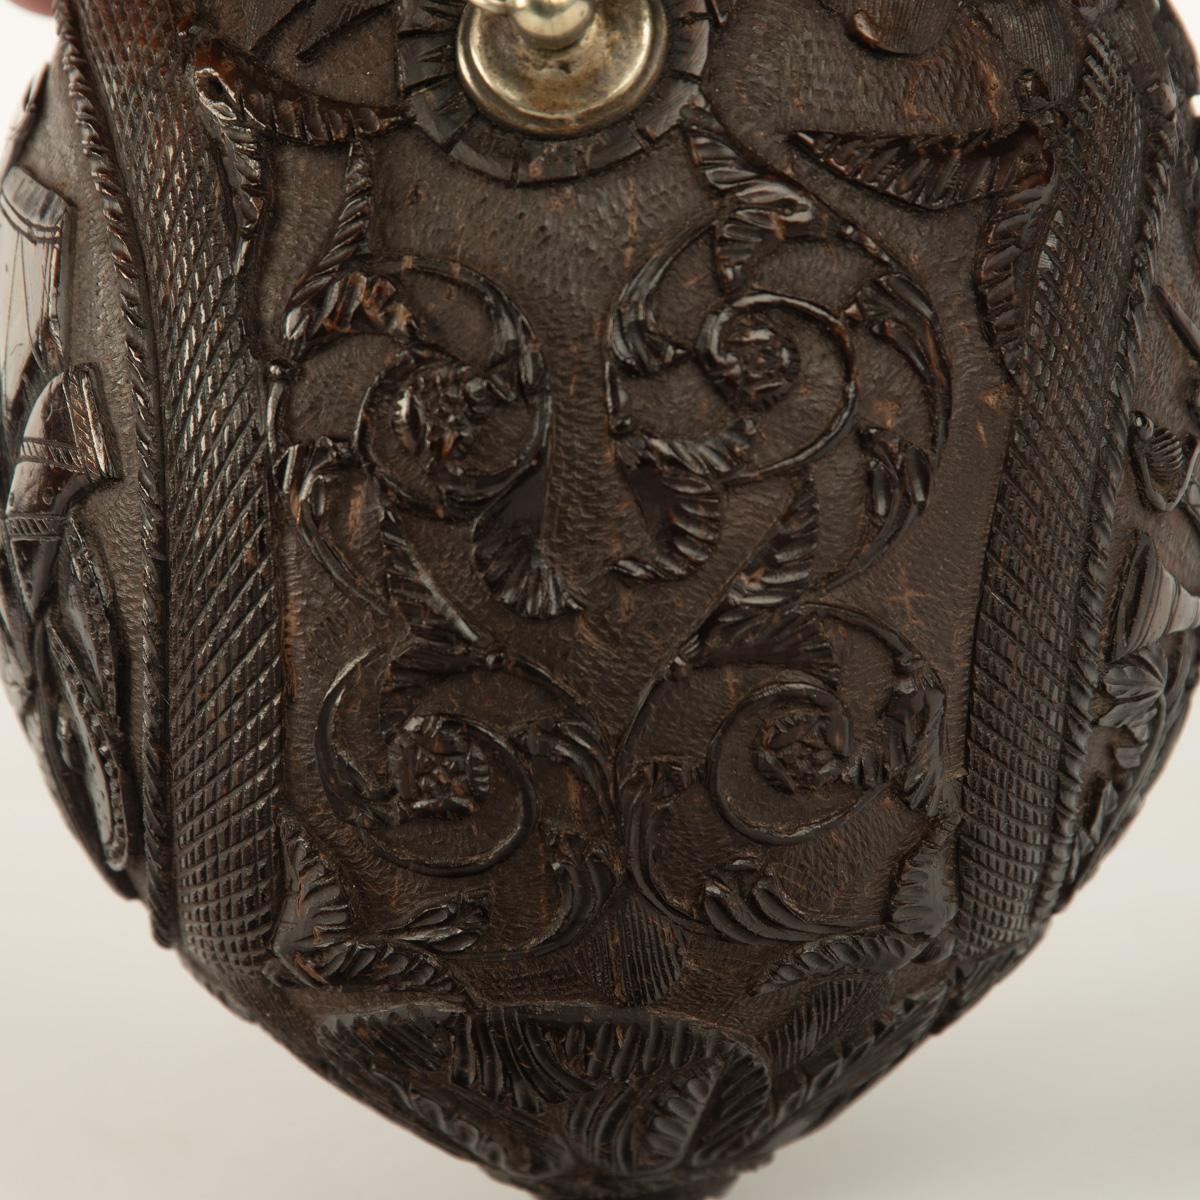 Coconut A sailor’s carved coconut Bugbear powder flask For Sale